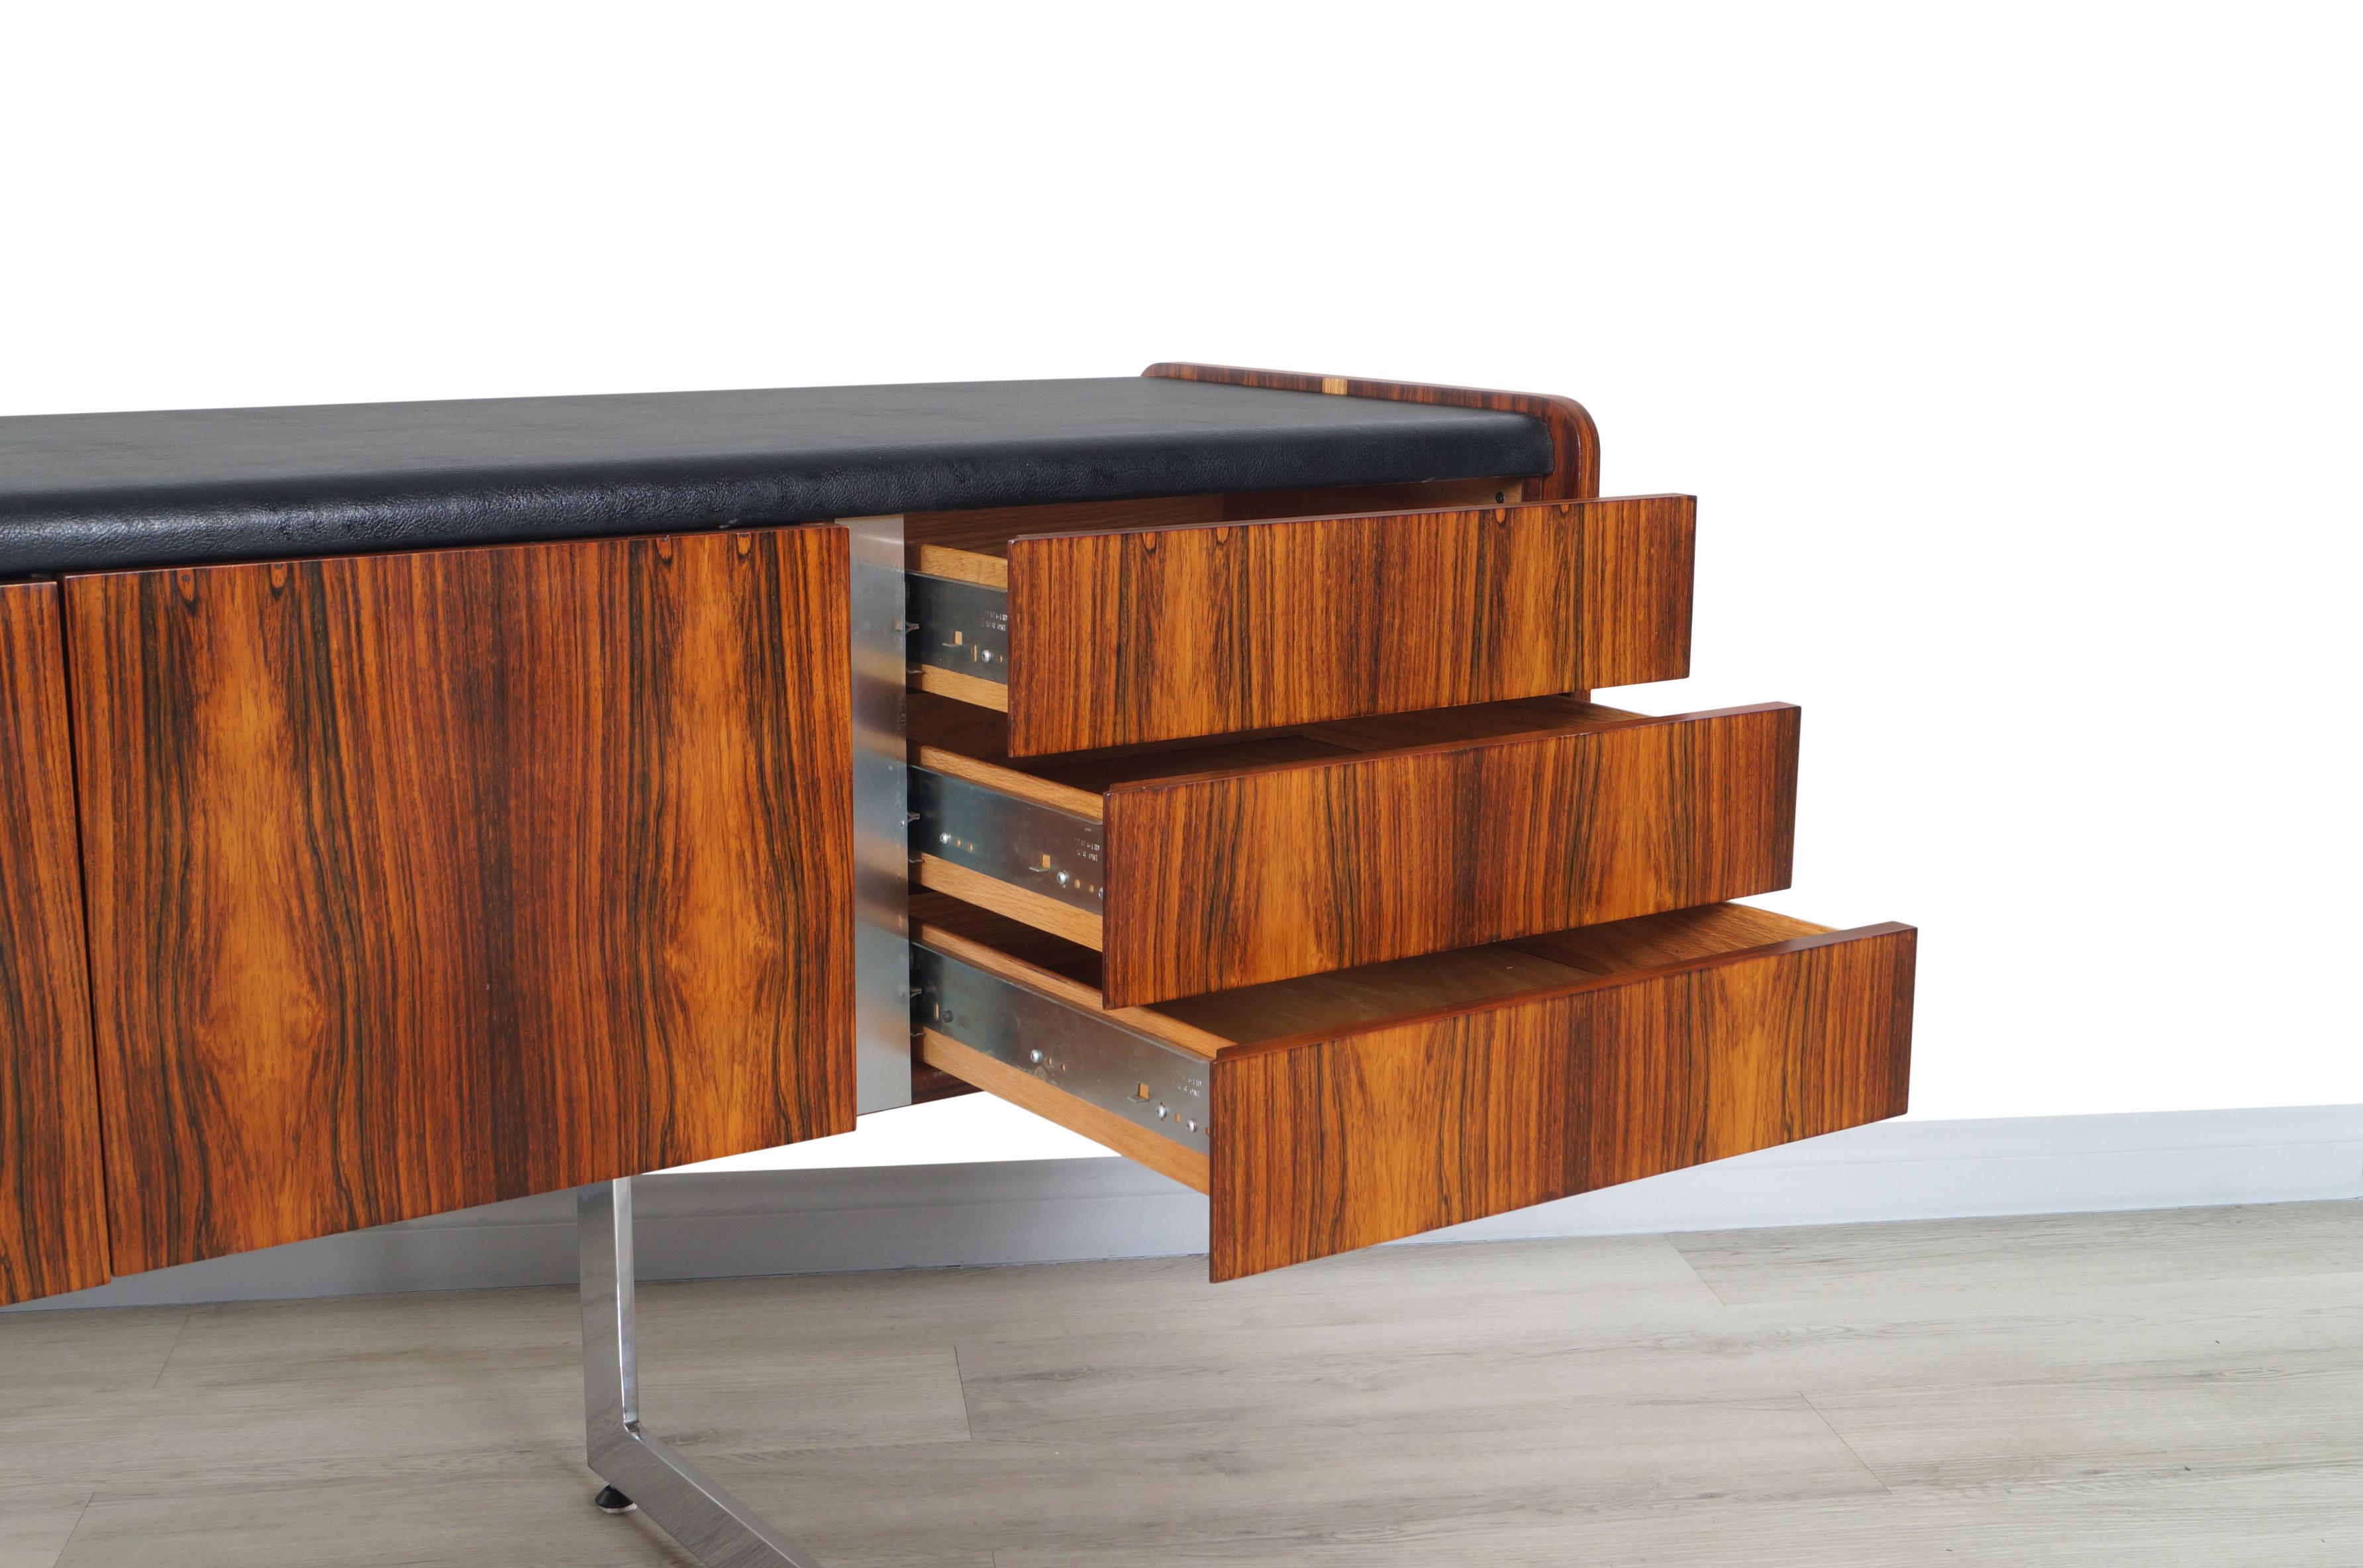 Canadian Midcentury Rosewood and Chrome Credenza by Ste. Marie & Laurent